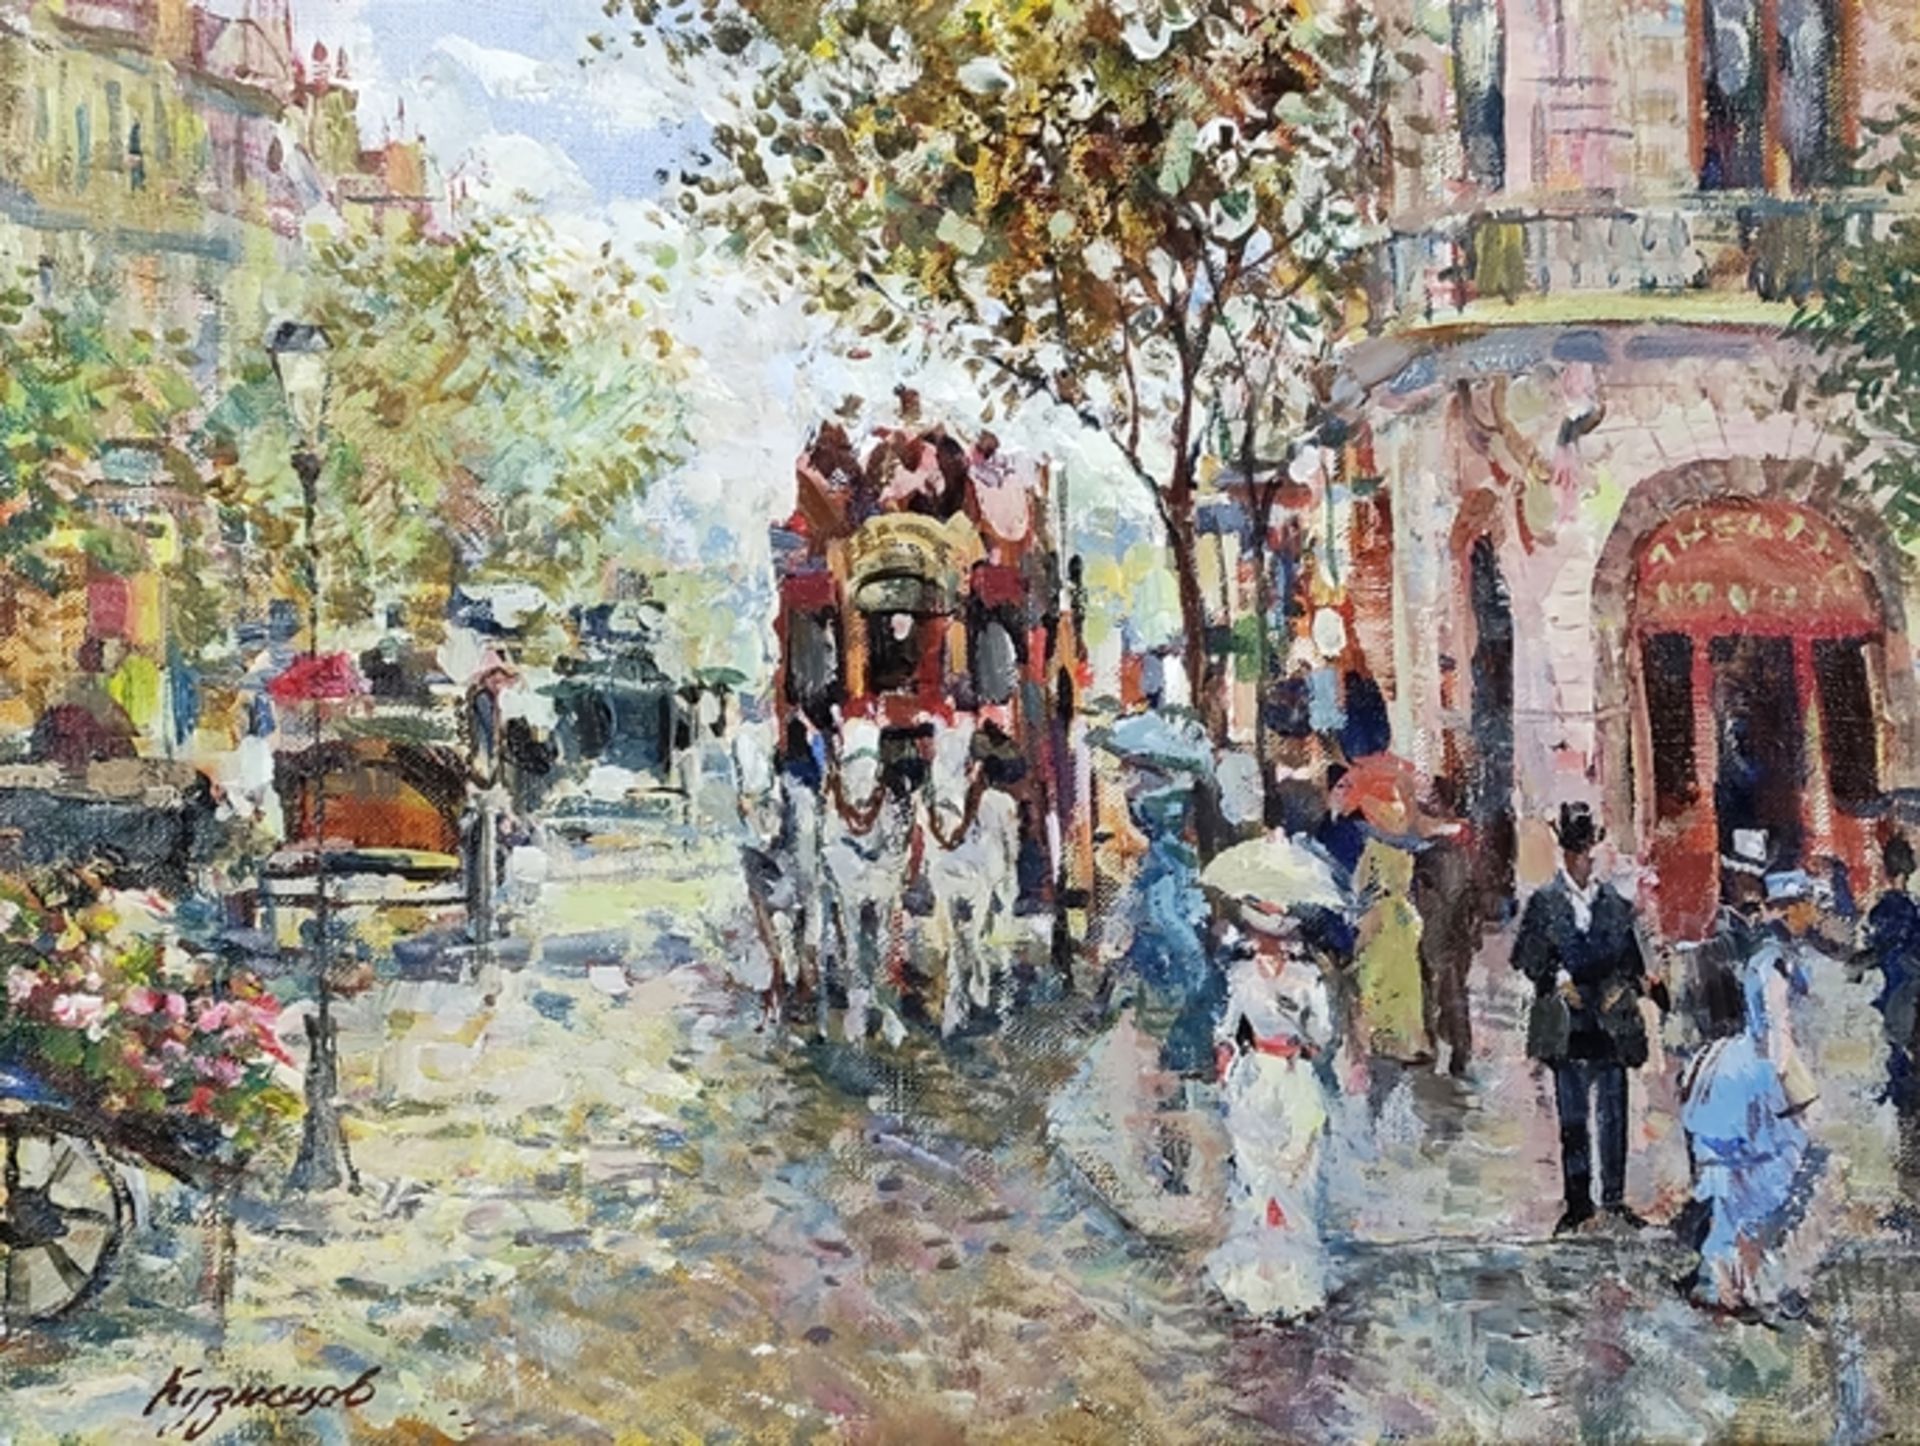 Kuznetsov, Alexander (1957) "Street View", probably France, in impressionist manner, oil on canvas,